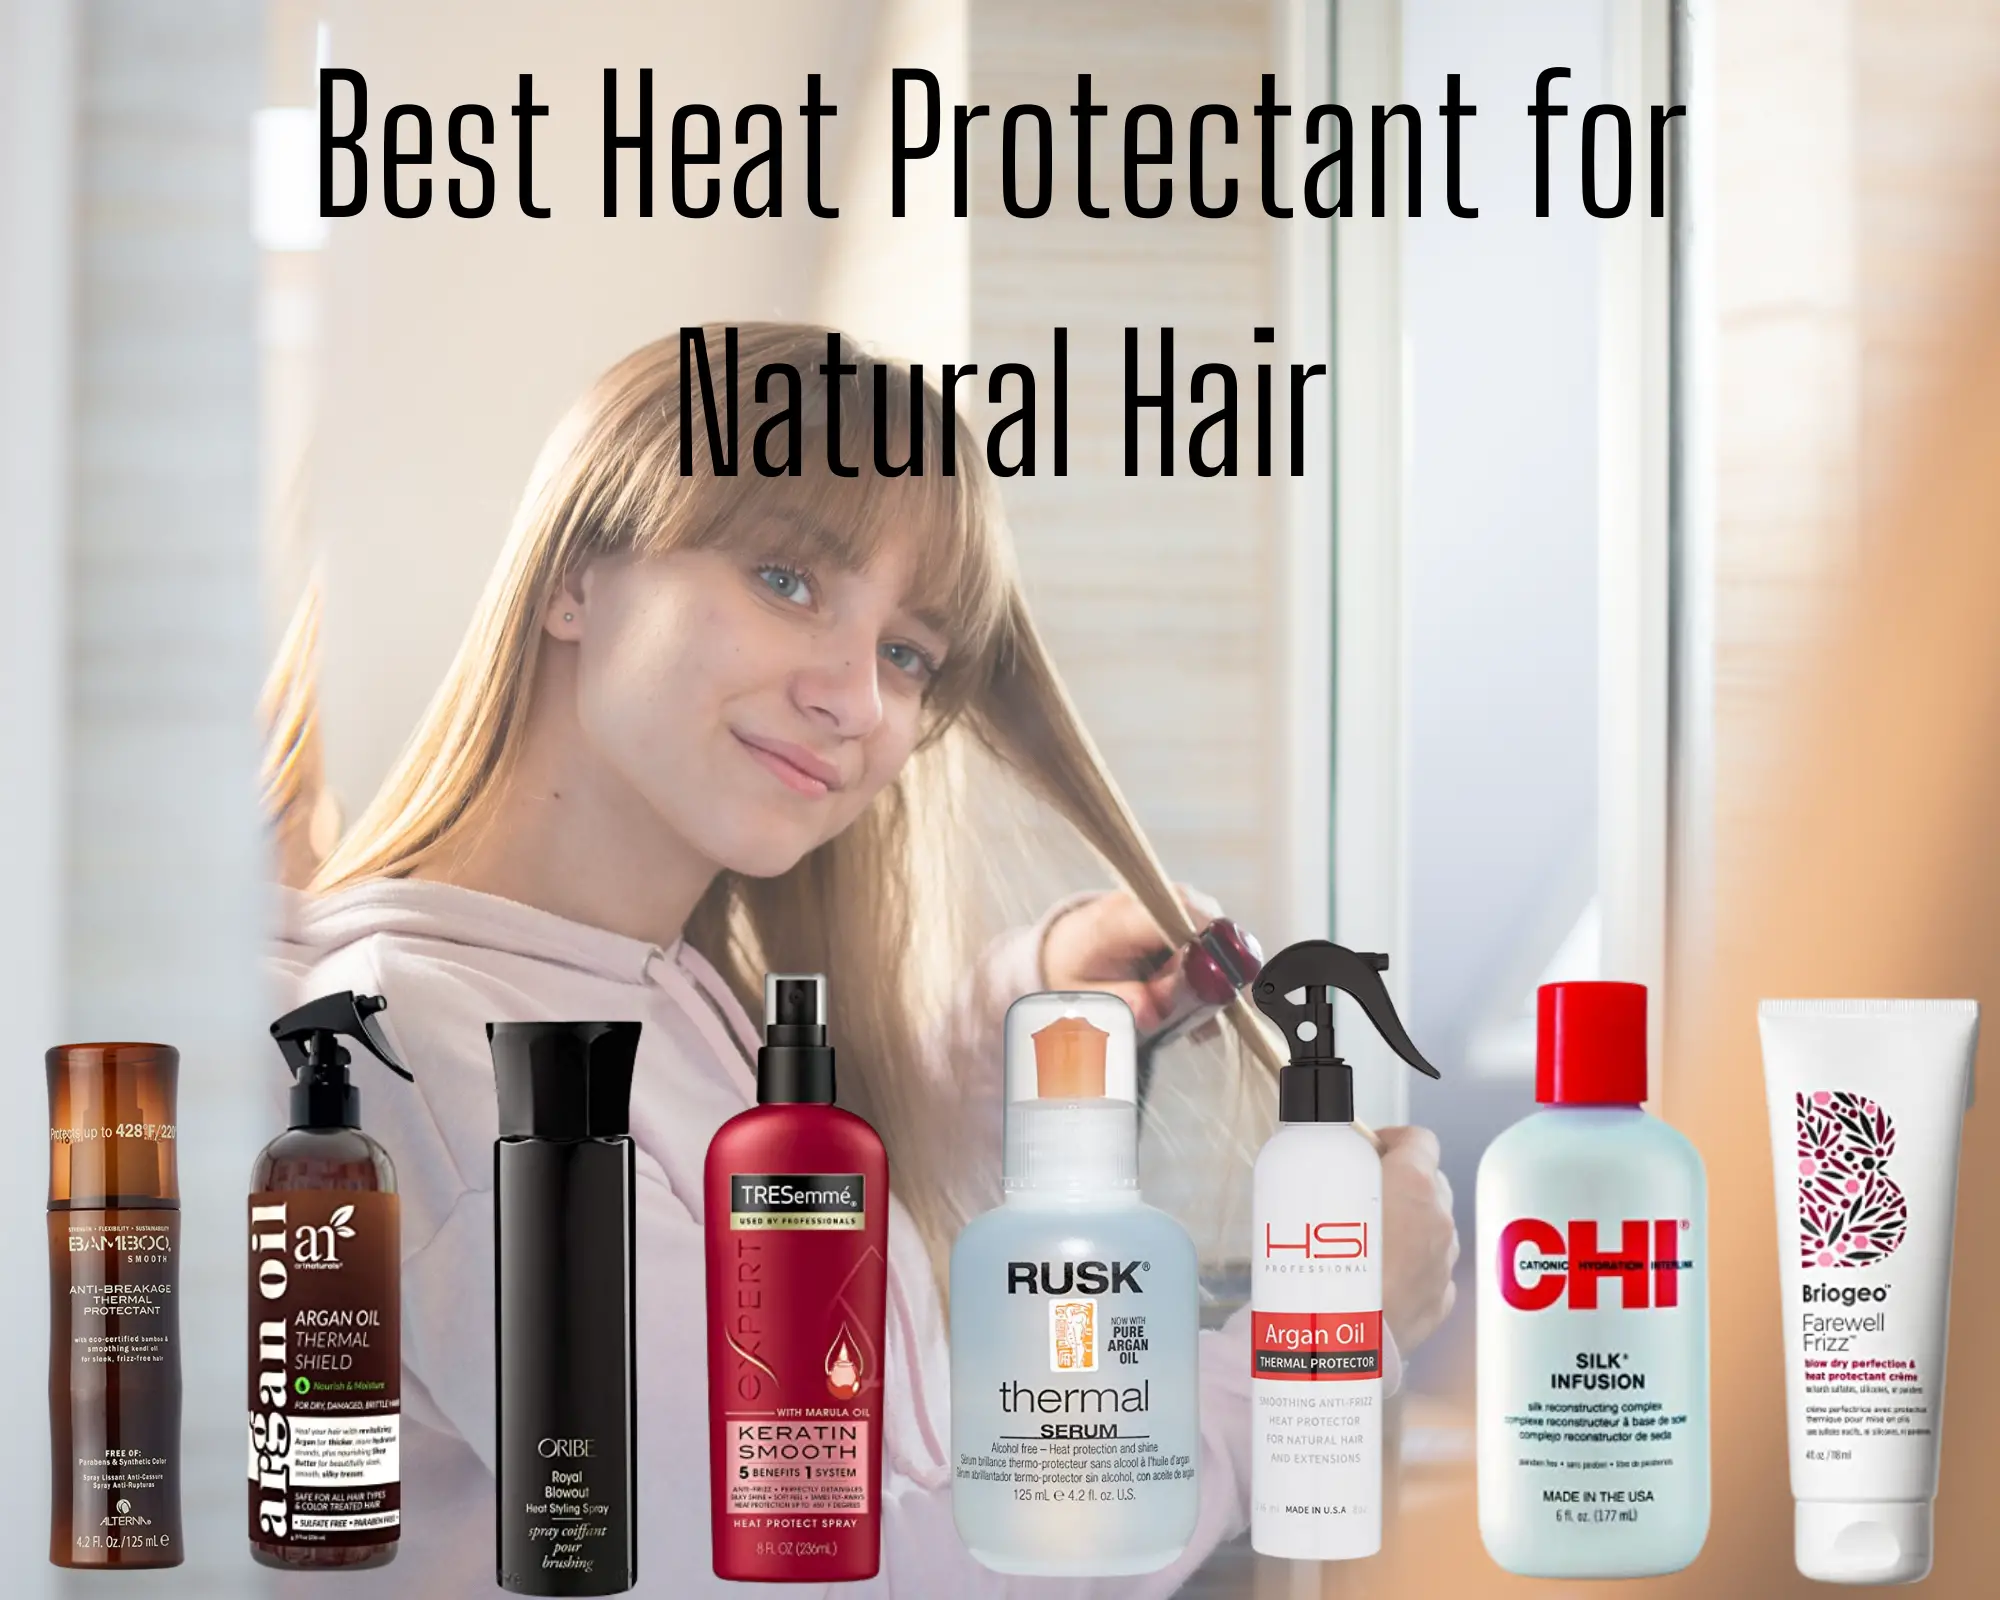 Best Heat Protectant for Natural Hair